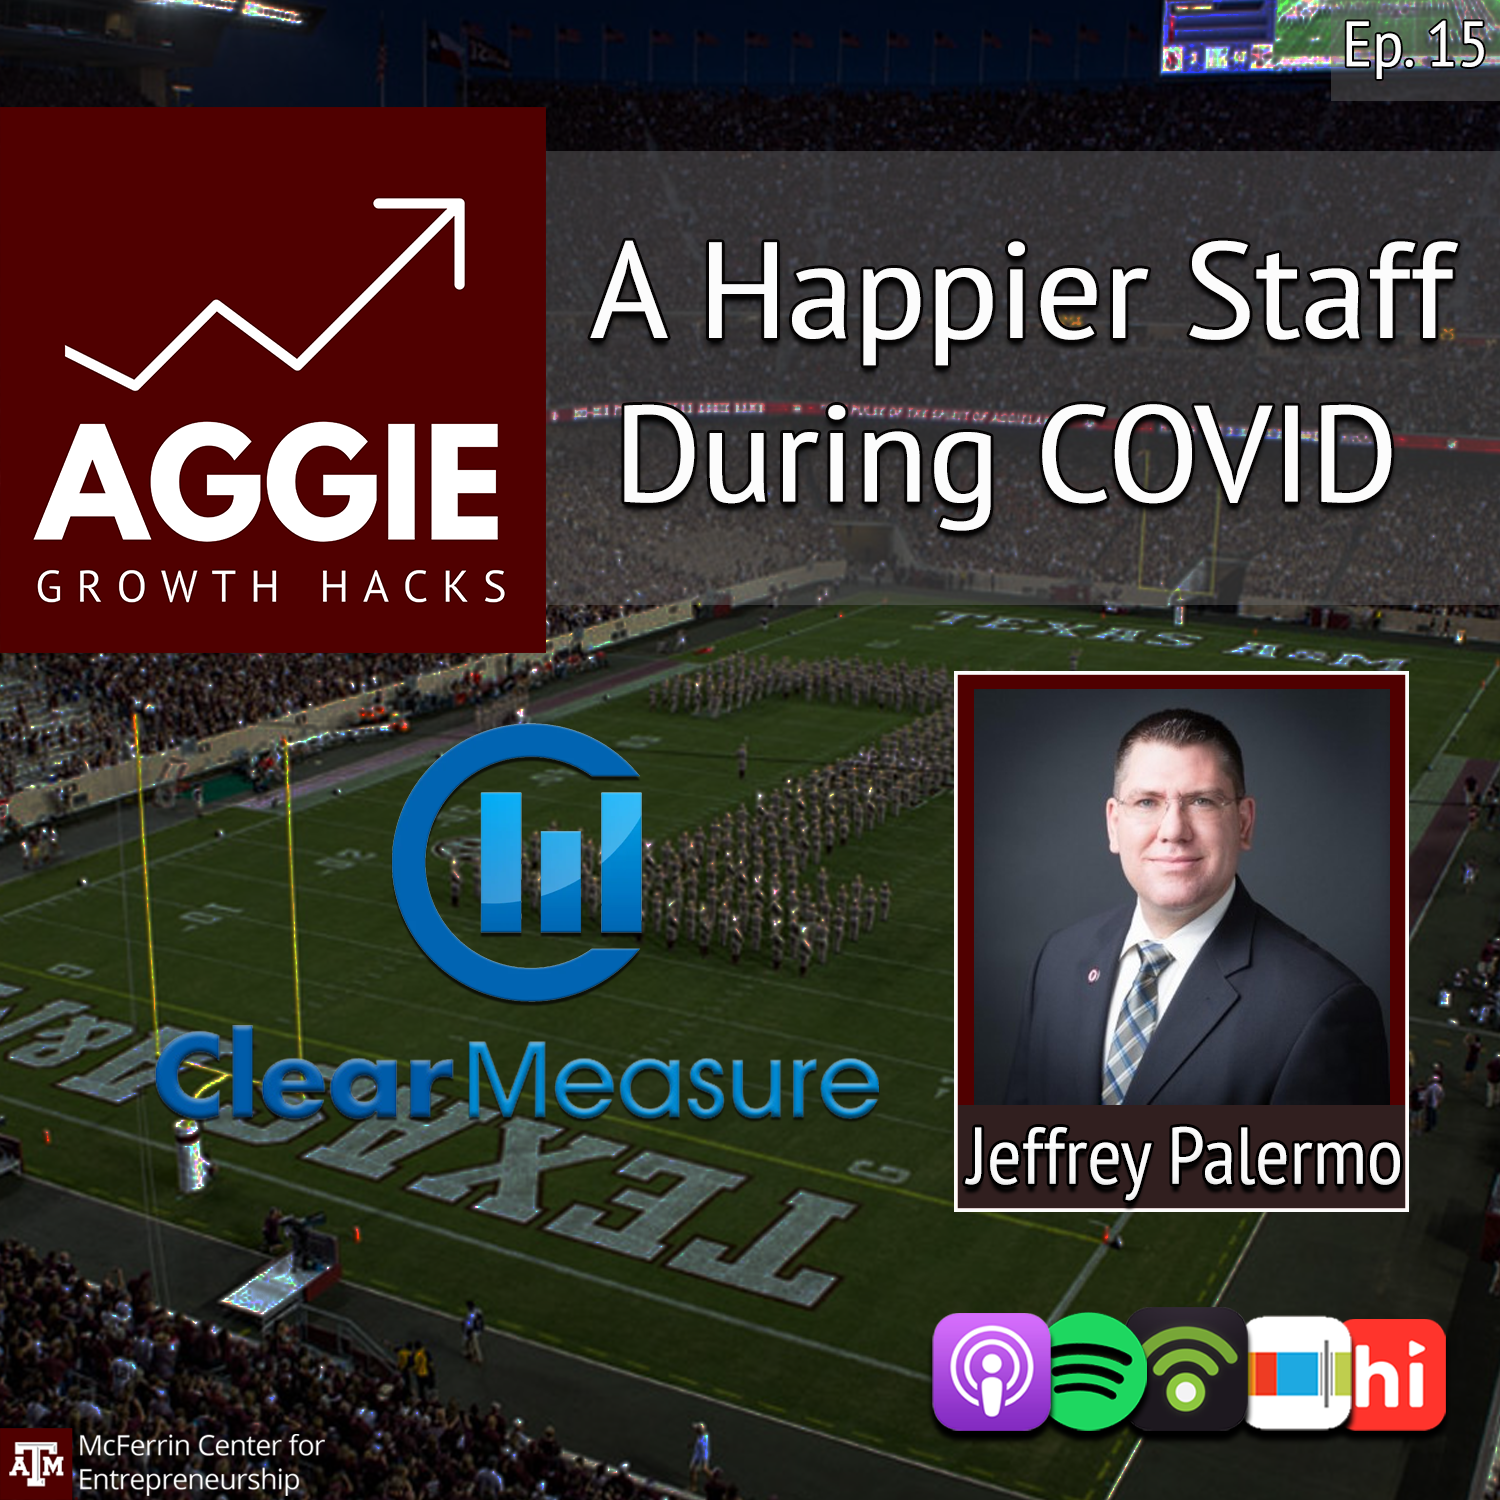 A Happier Staff - Jeffrey Palermo with Clear Measure